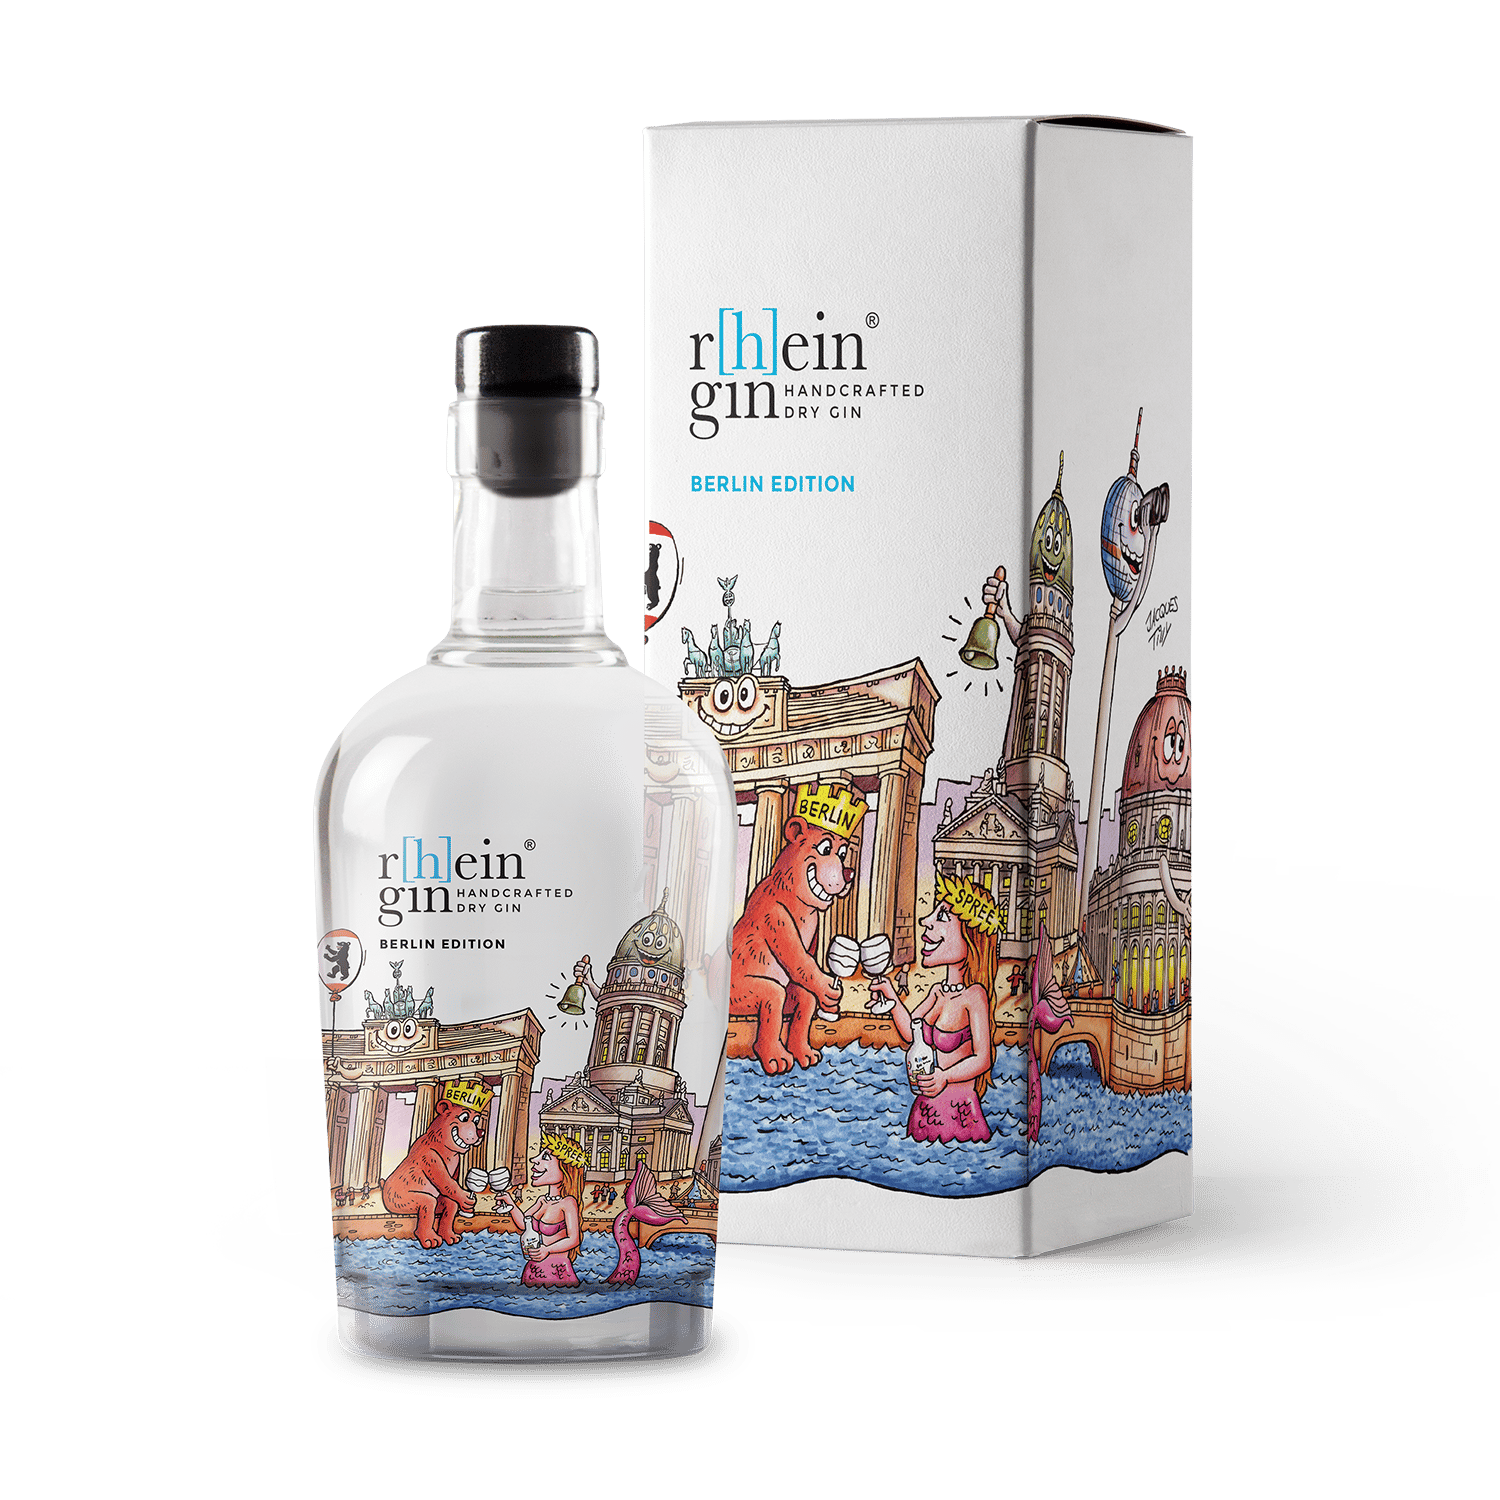 Handcrafted Dry Gin - r[h]eingin - Tilly Berlin Edition